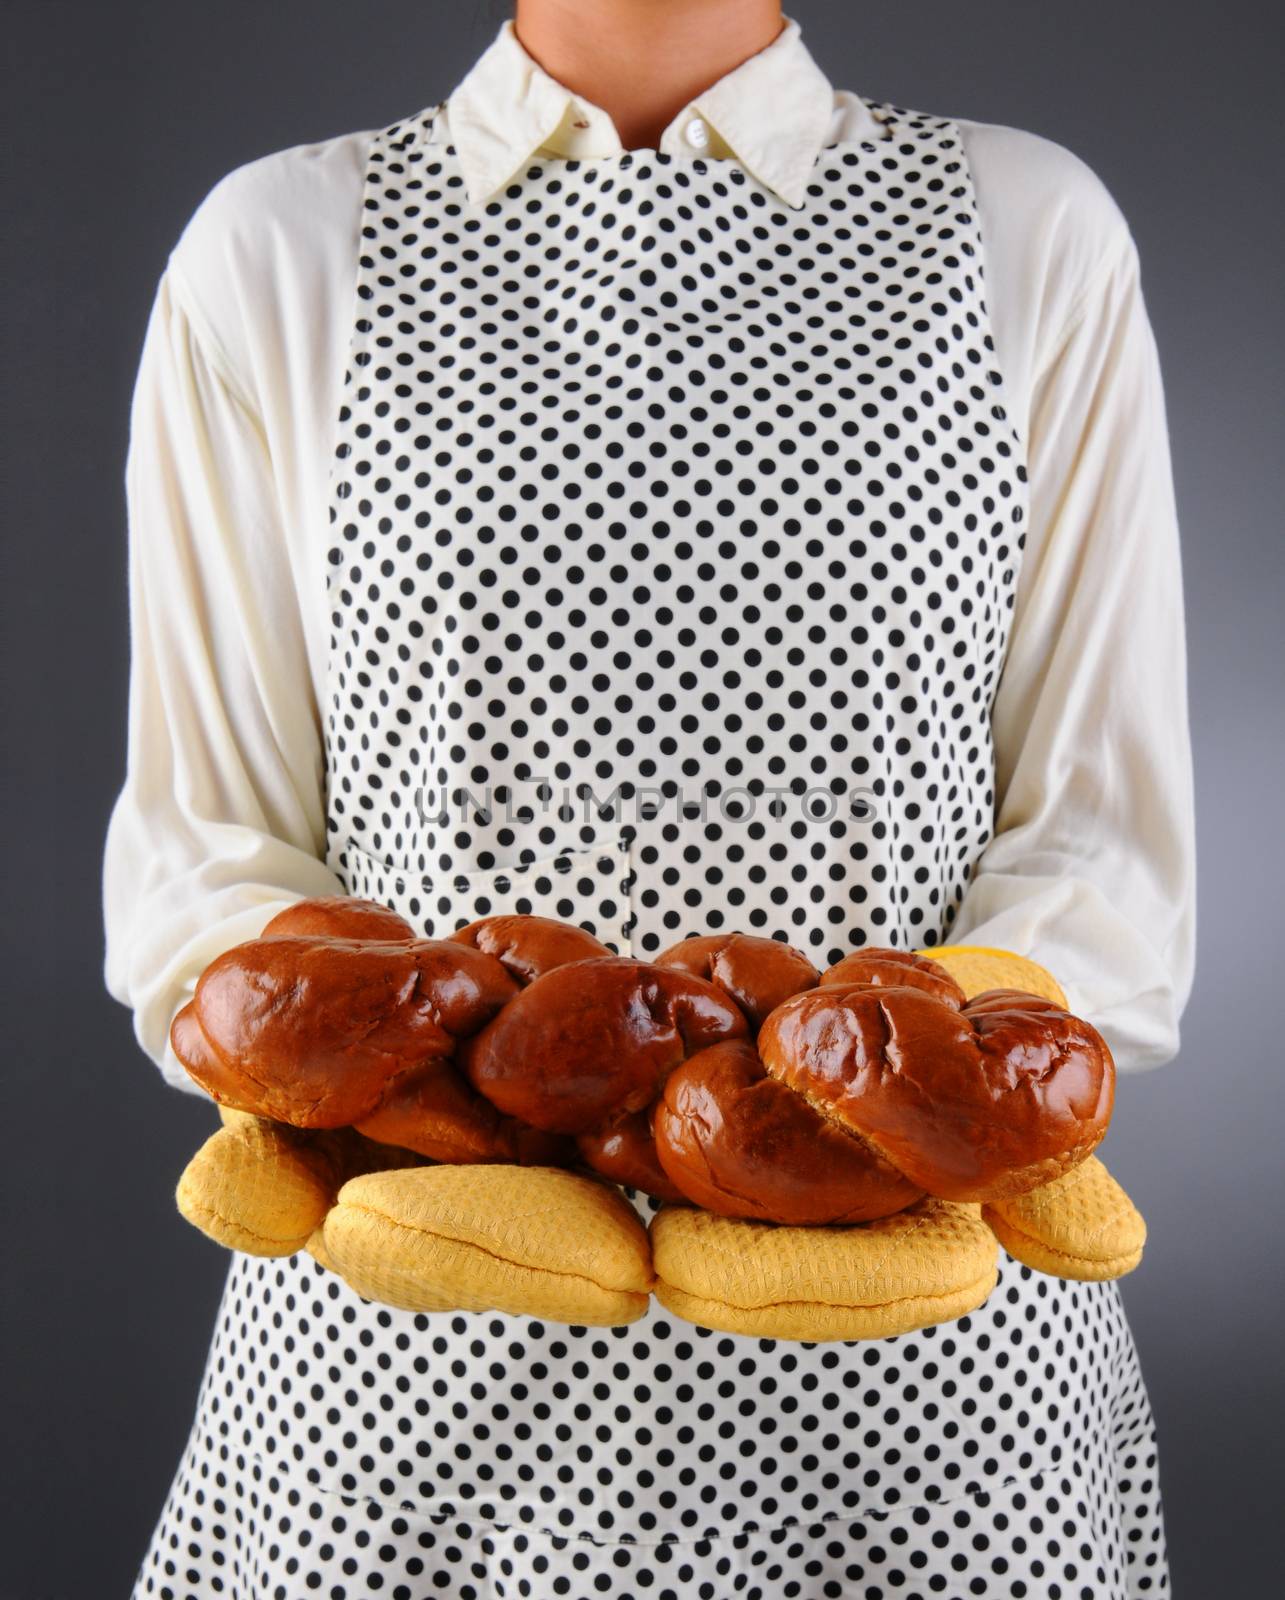 Closeup of a homemaker in an apron and oven mitts holding a freshly baked loaf of challah bread. Horizontal format over a light to dark background. Woman is unrecognizable. Shallow depth of field.